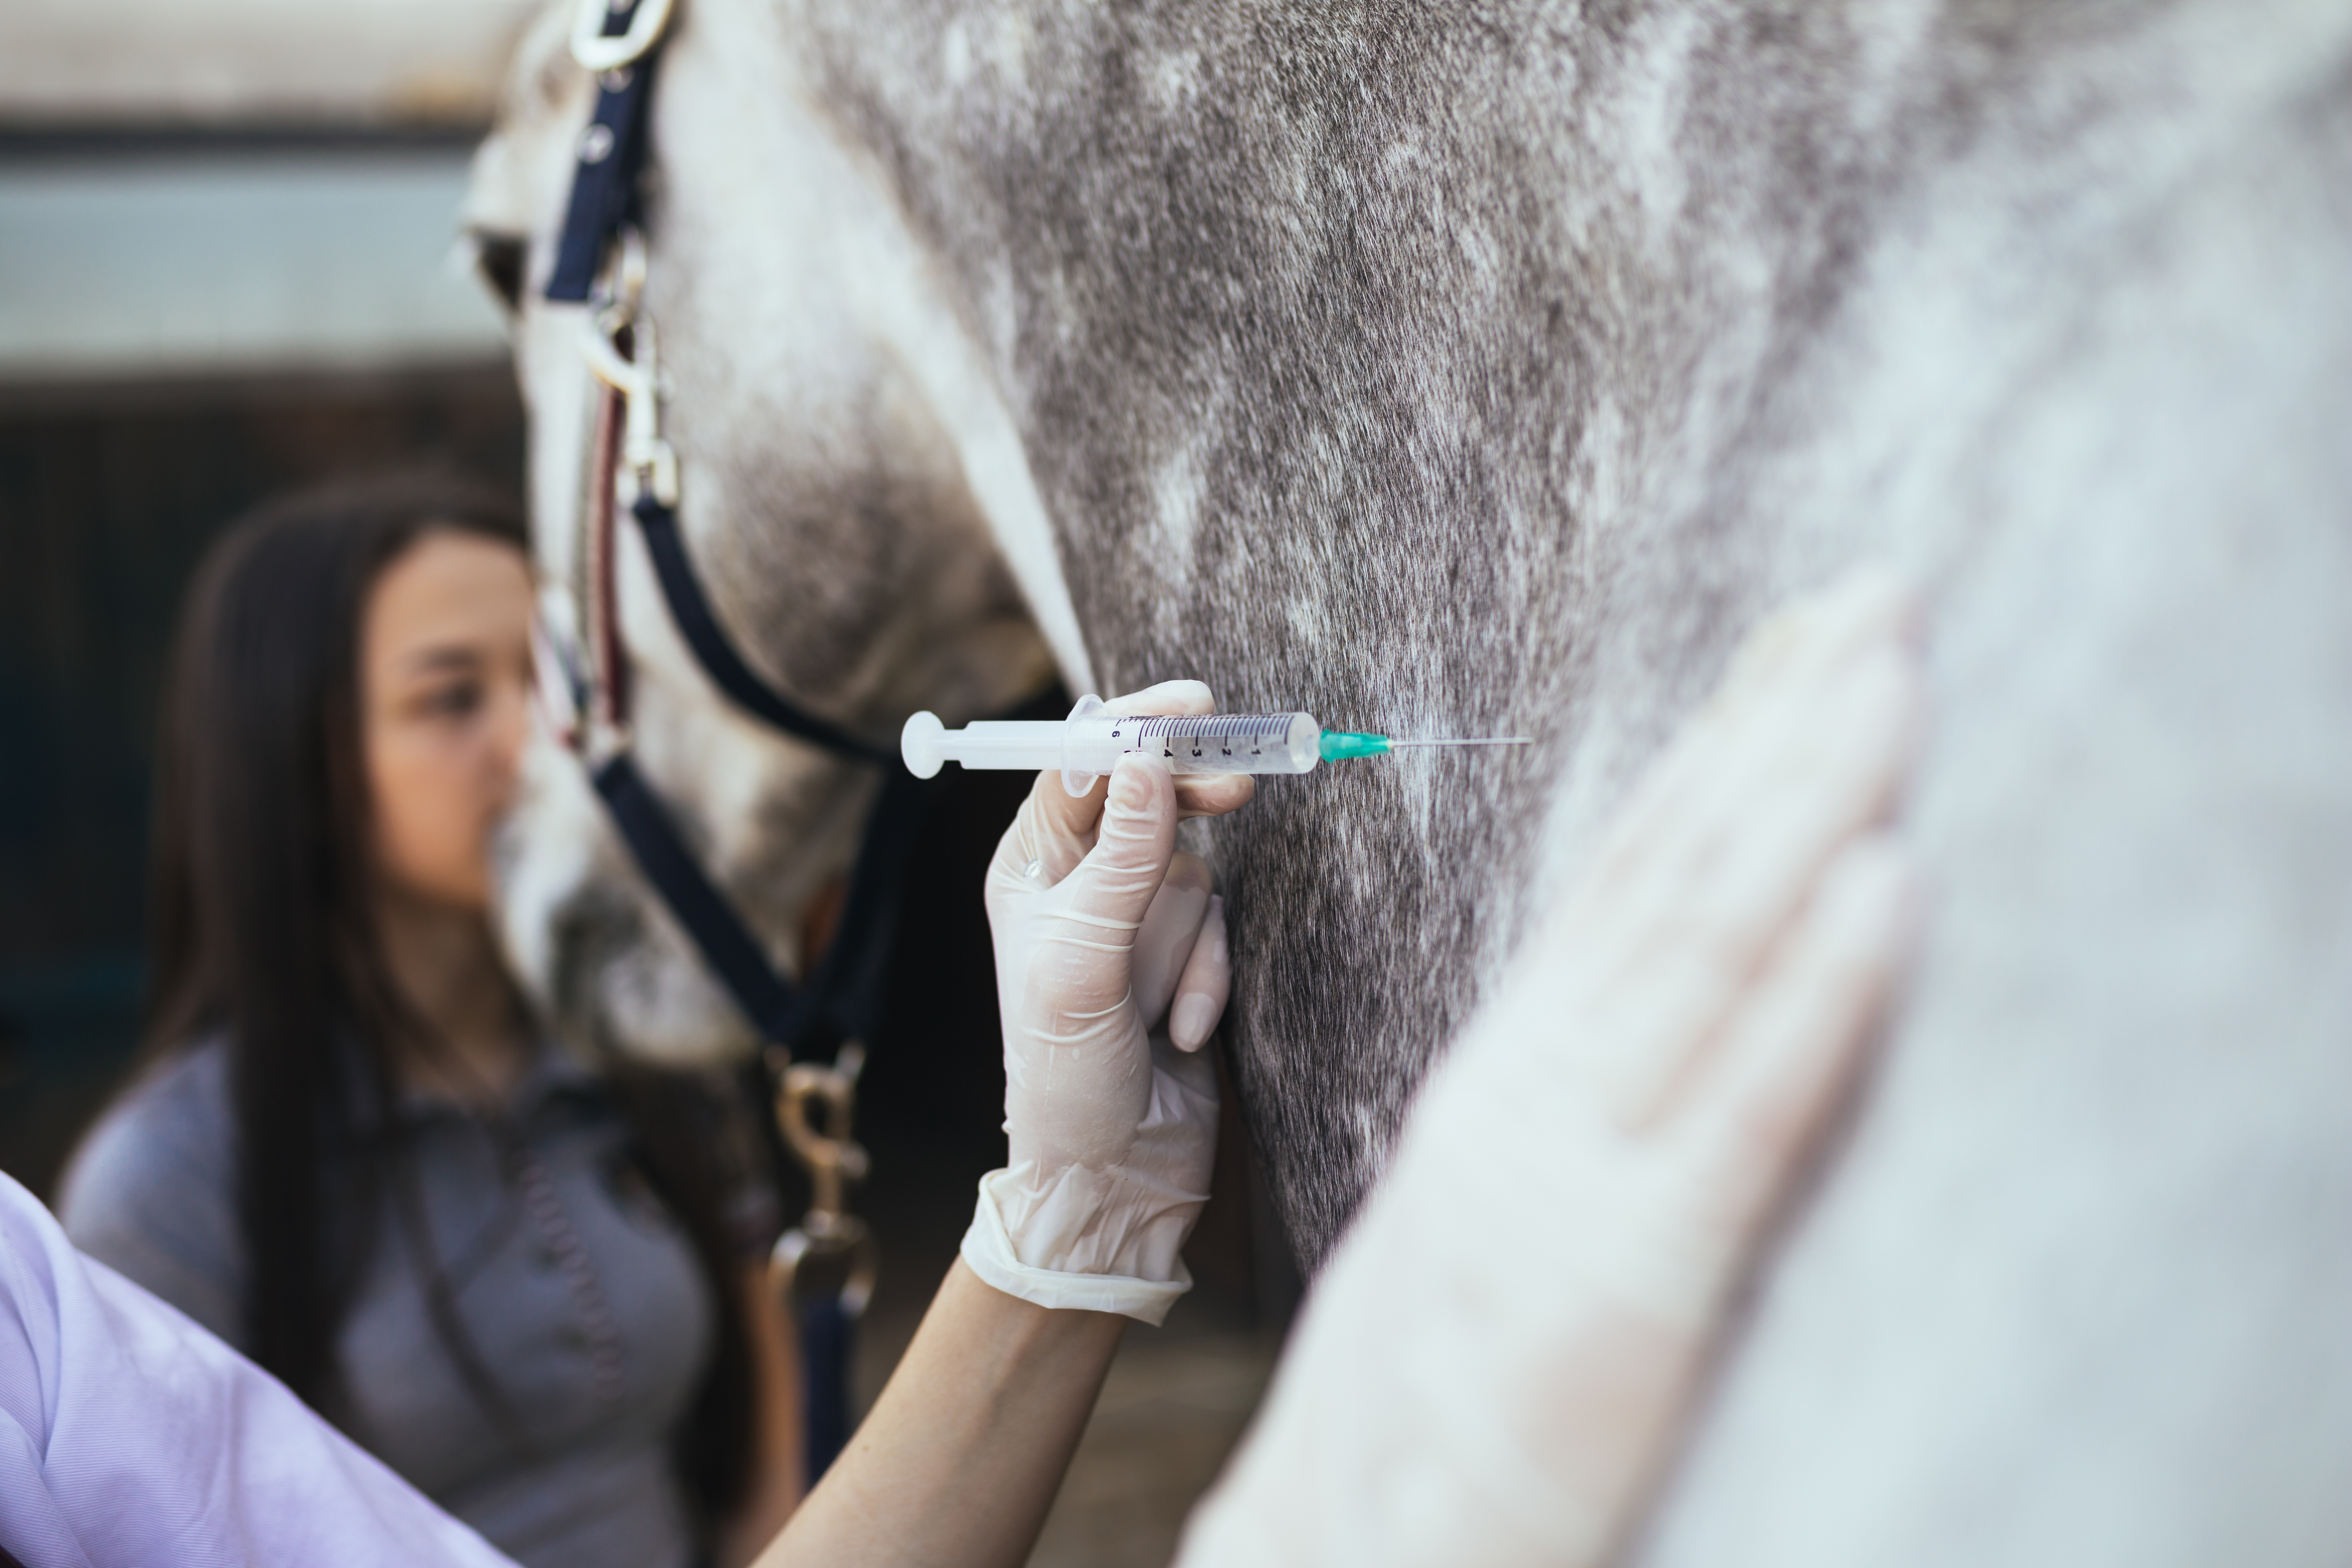 A horse being given an injection